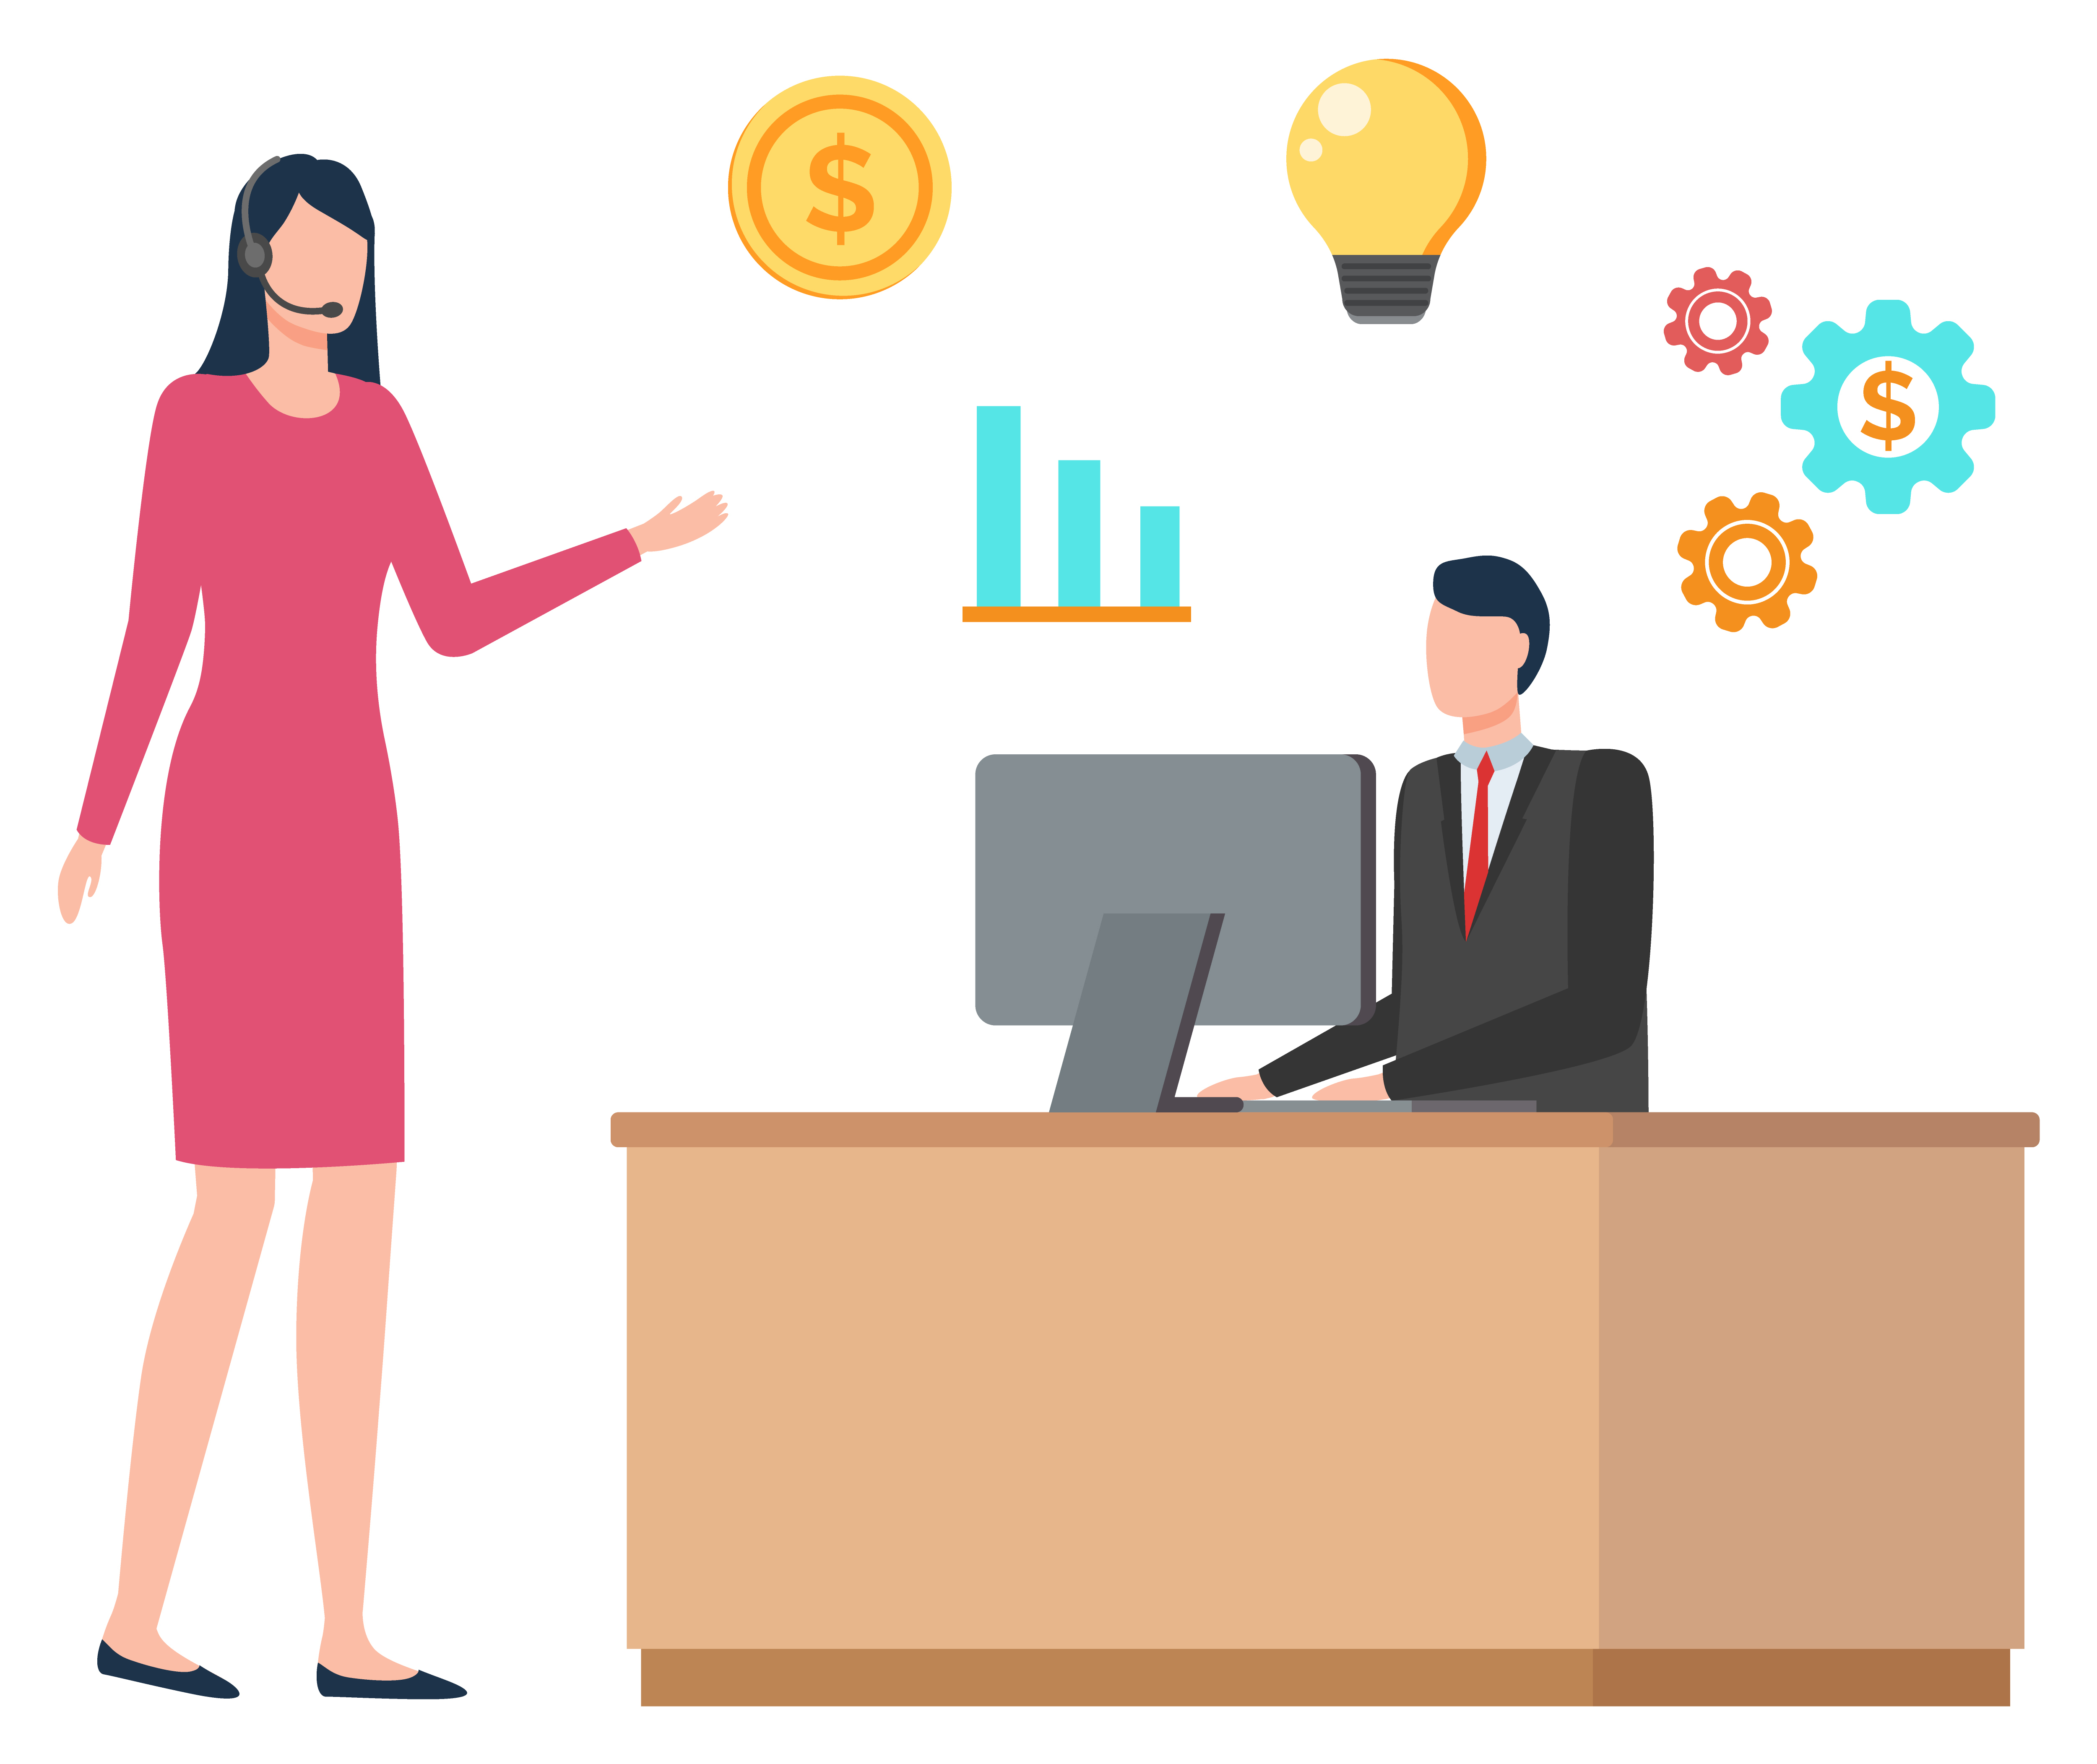 Man wearing black suit and tie sitting at desk and working with computer. Woman in headset wearing pink. Office communication concept. Light bulb, gears, diagram and coin icons vector illustration. Man Working with Computer, Woman in Headset Vector